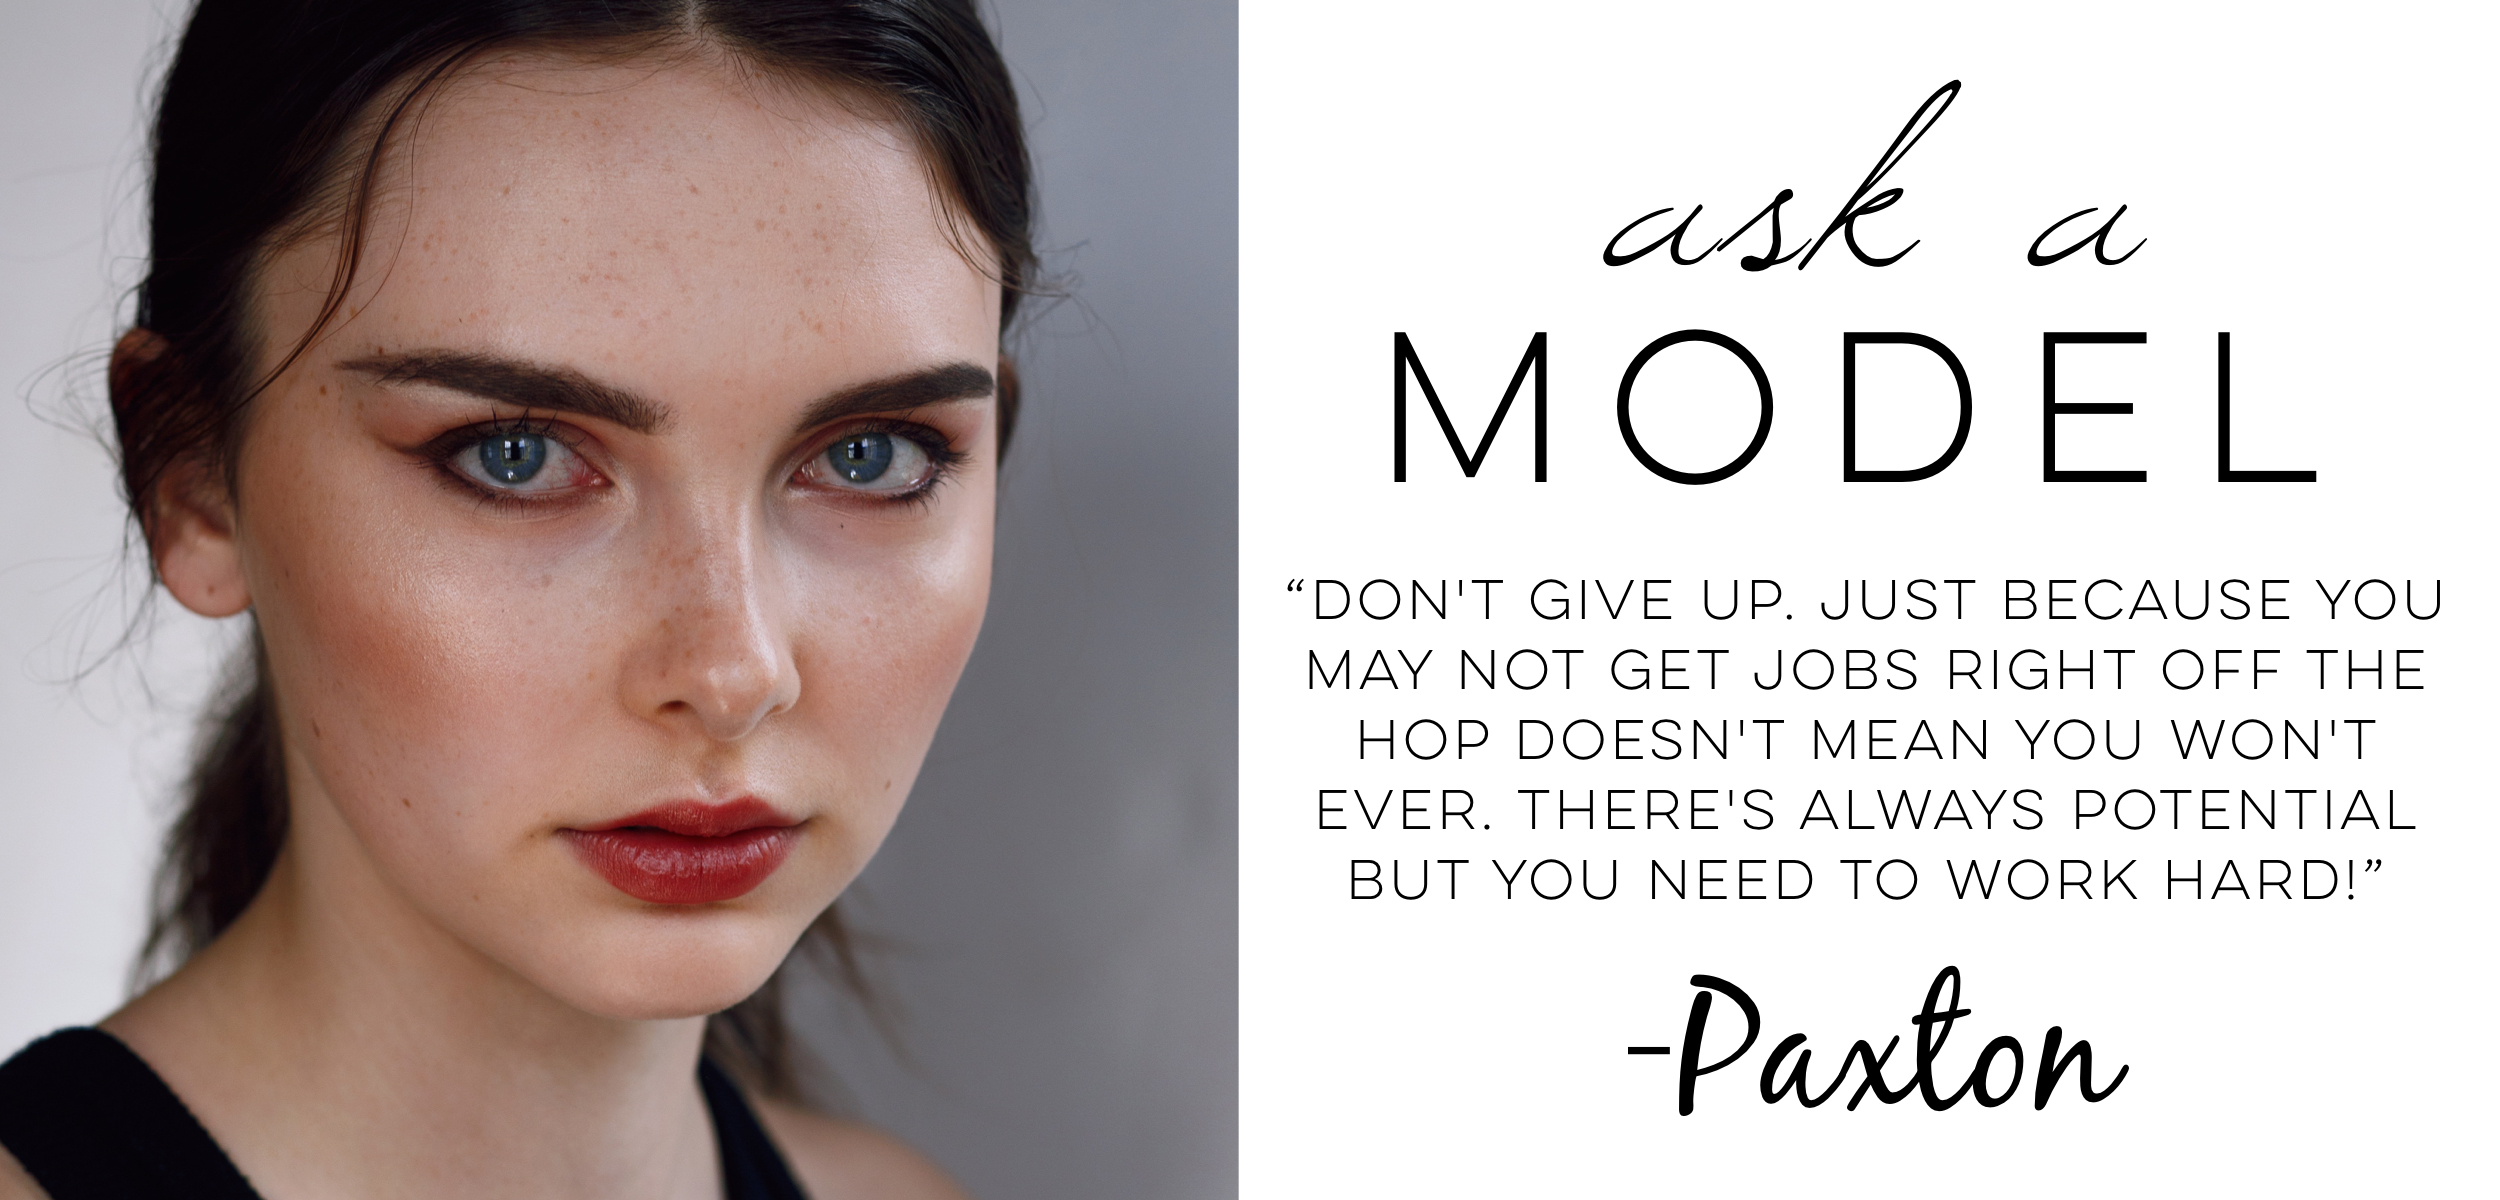 Ask a Model: Paxton - The Numa Network